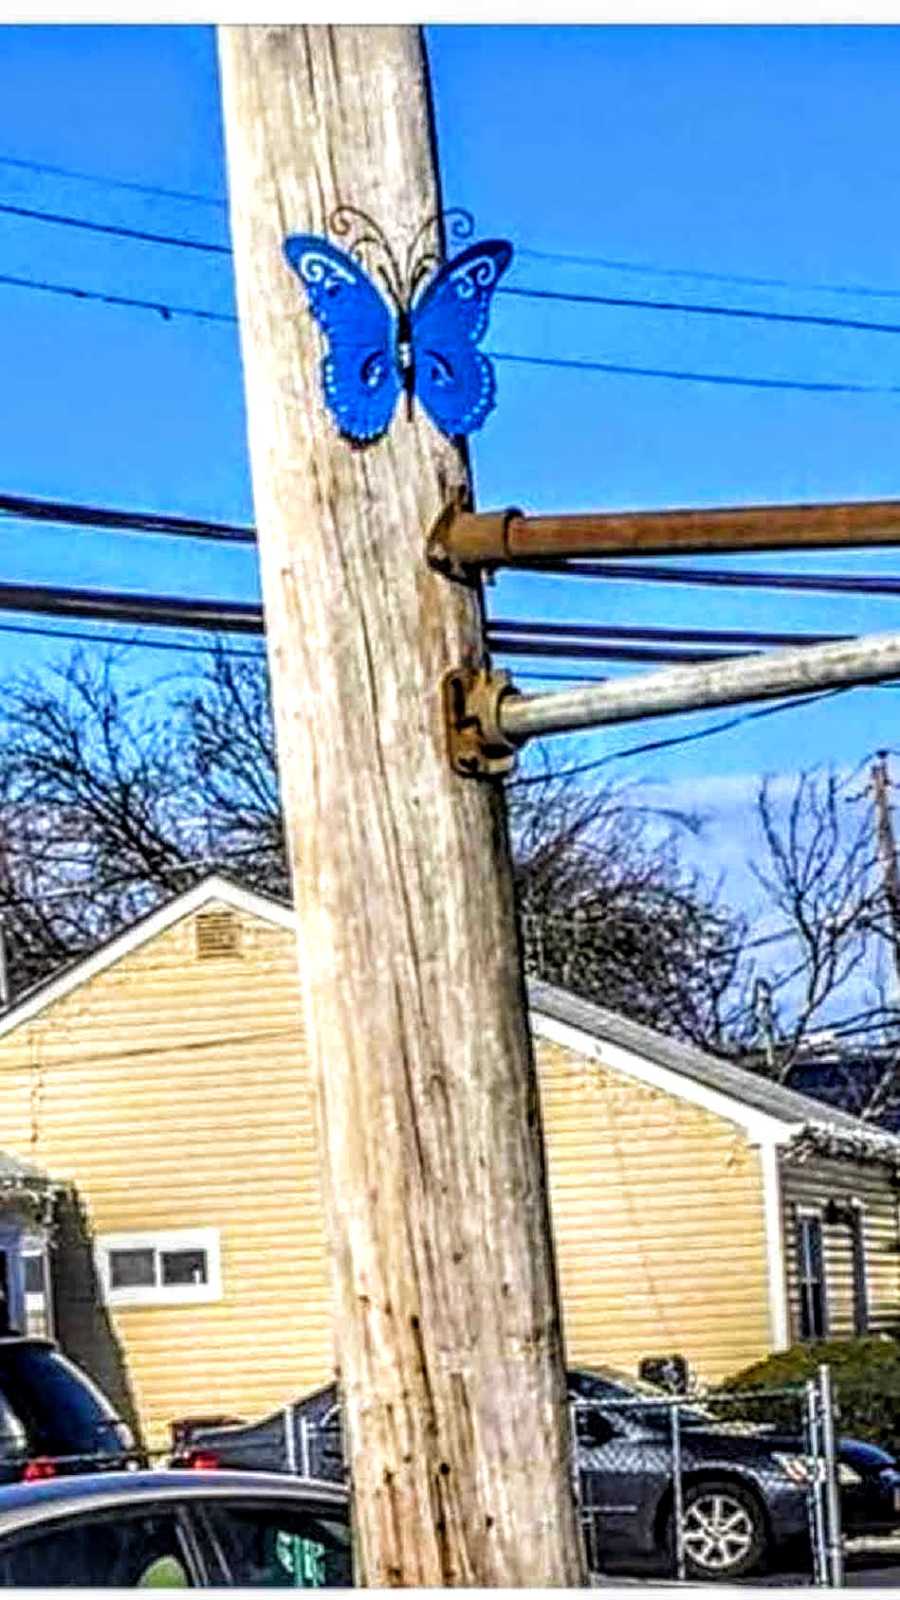 Blue butterfly on telephone pole that reminds woman of her deceased sister